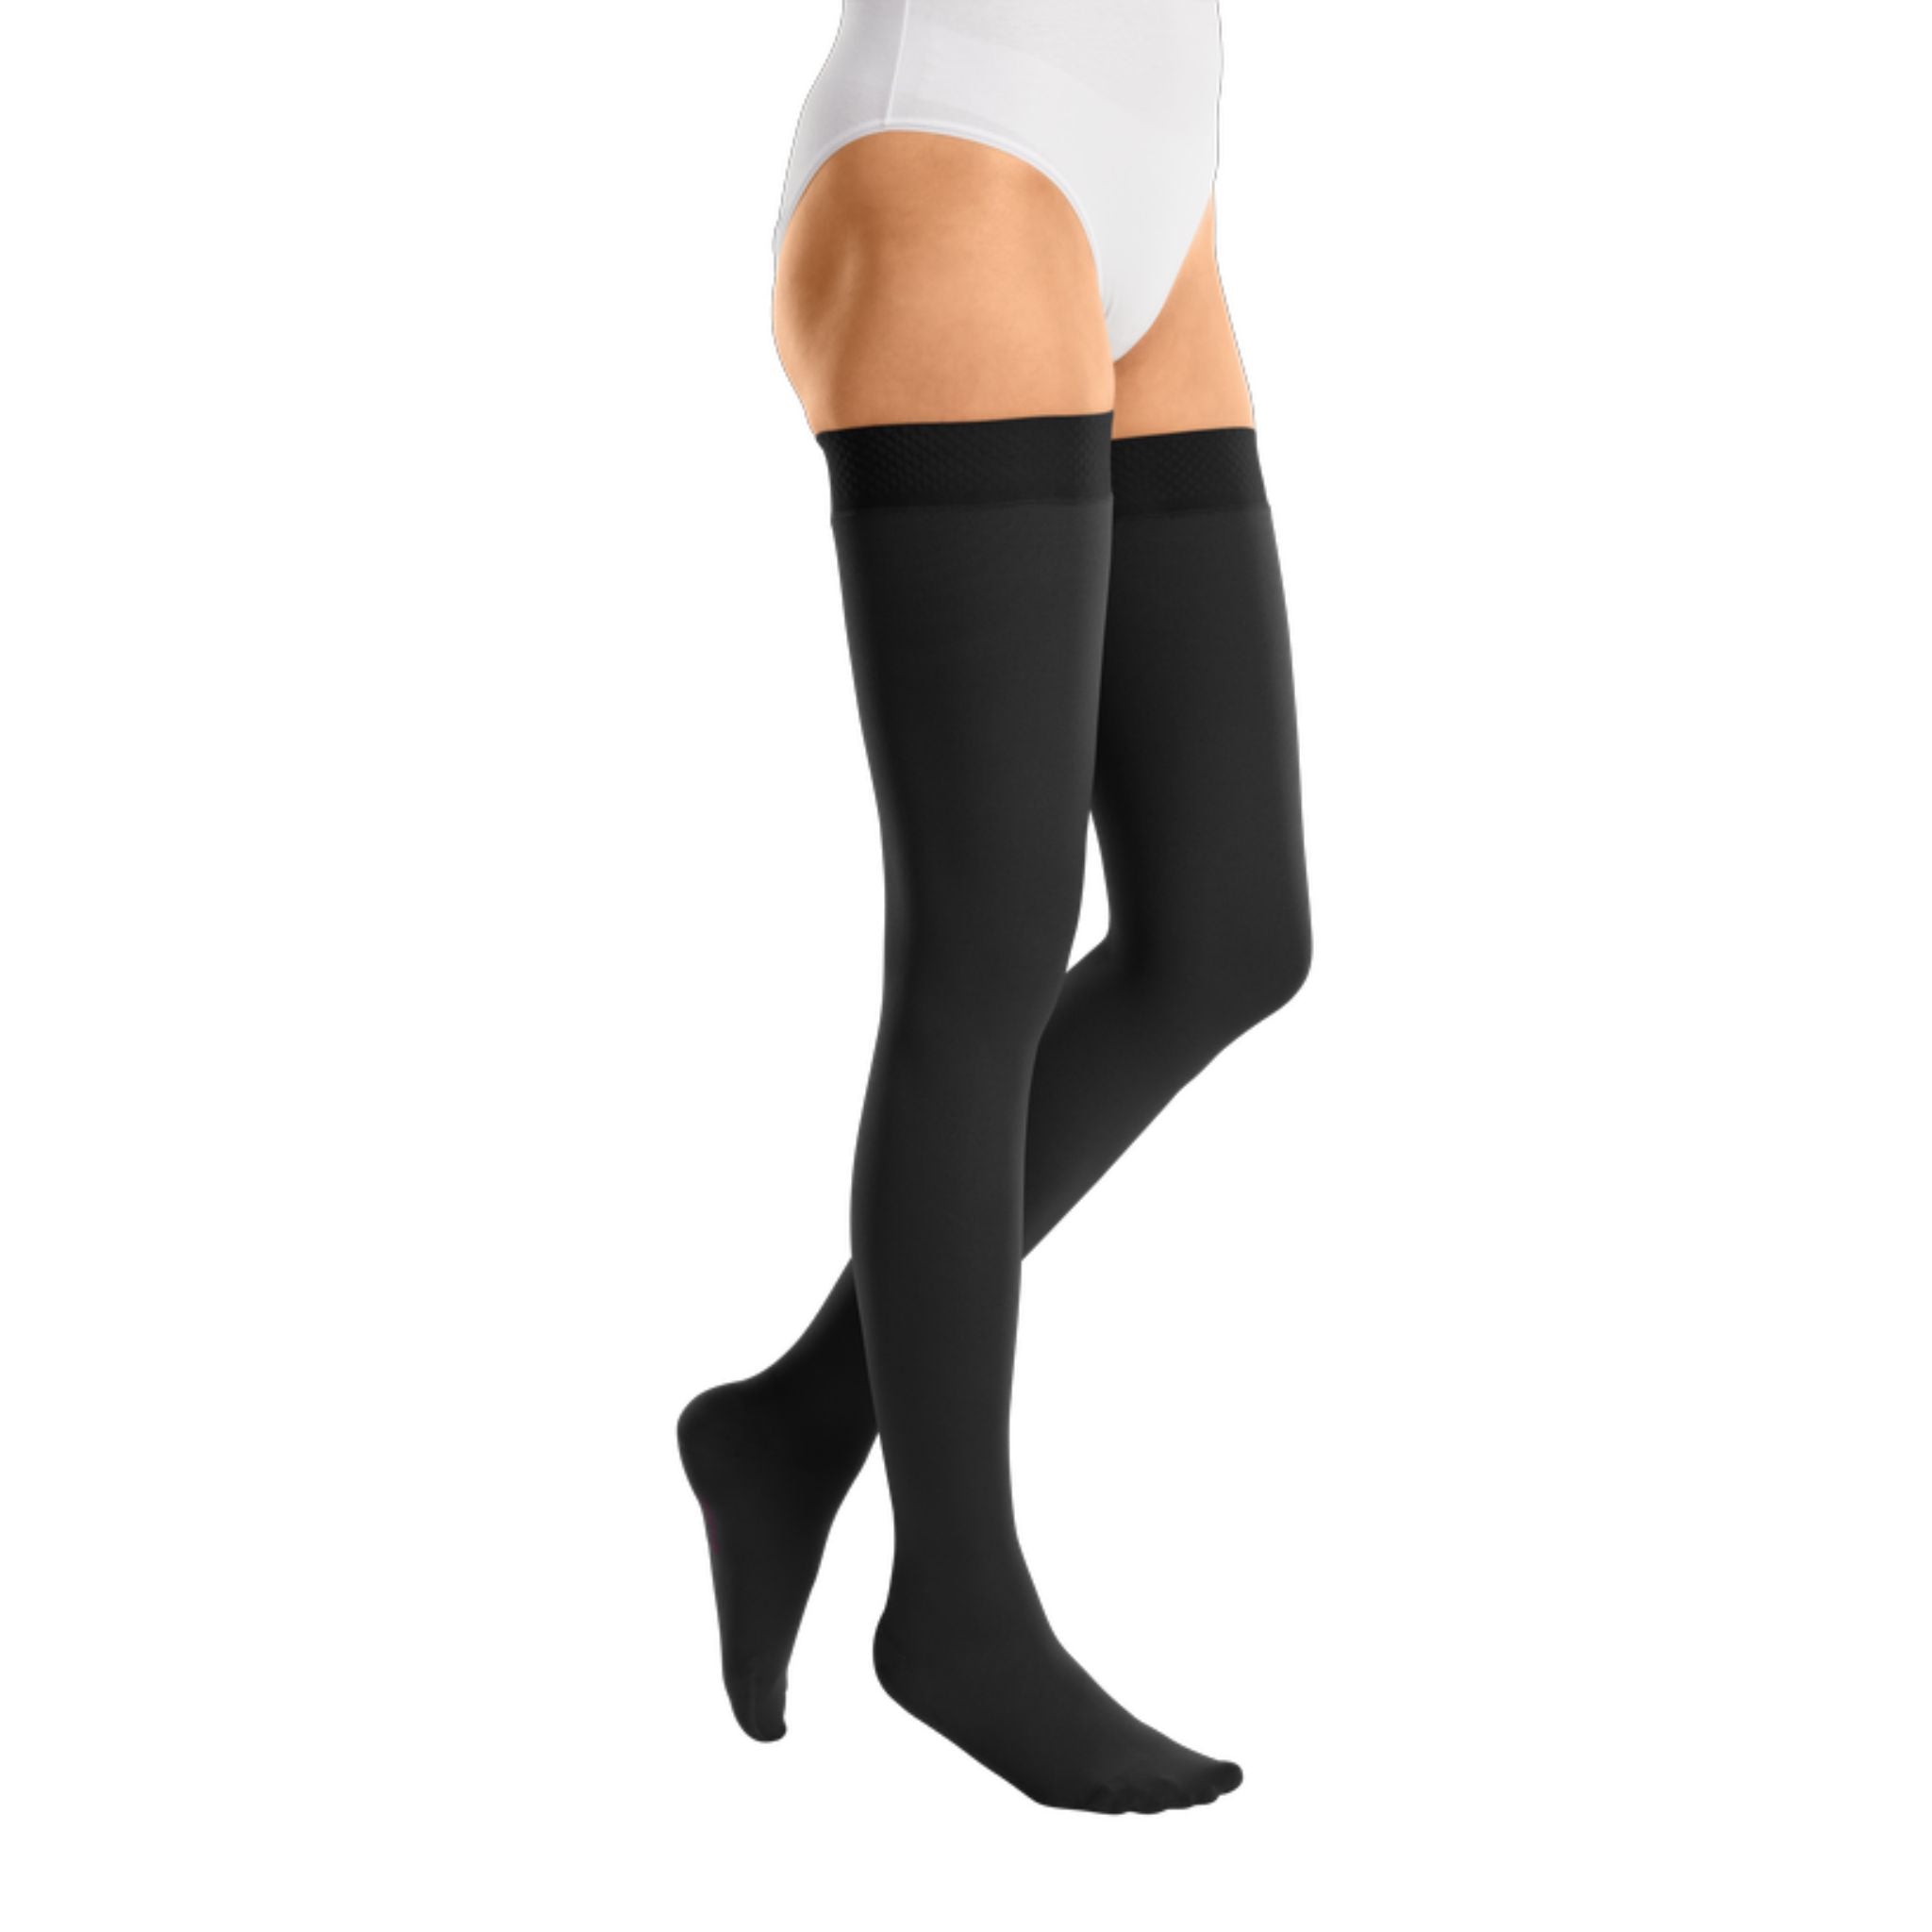 White thigh length compression stockings CCL1 with open toe and extra wide  top band mediven elegance